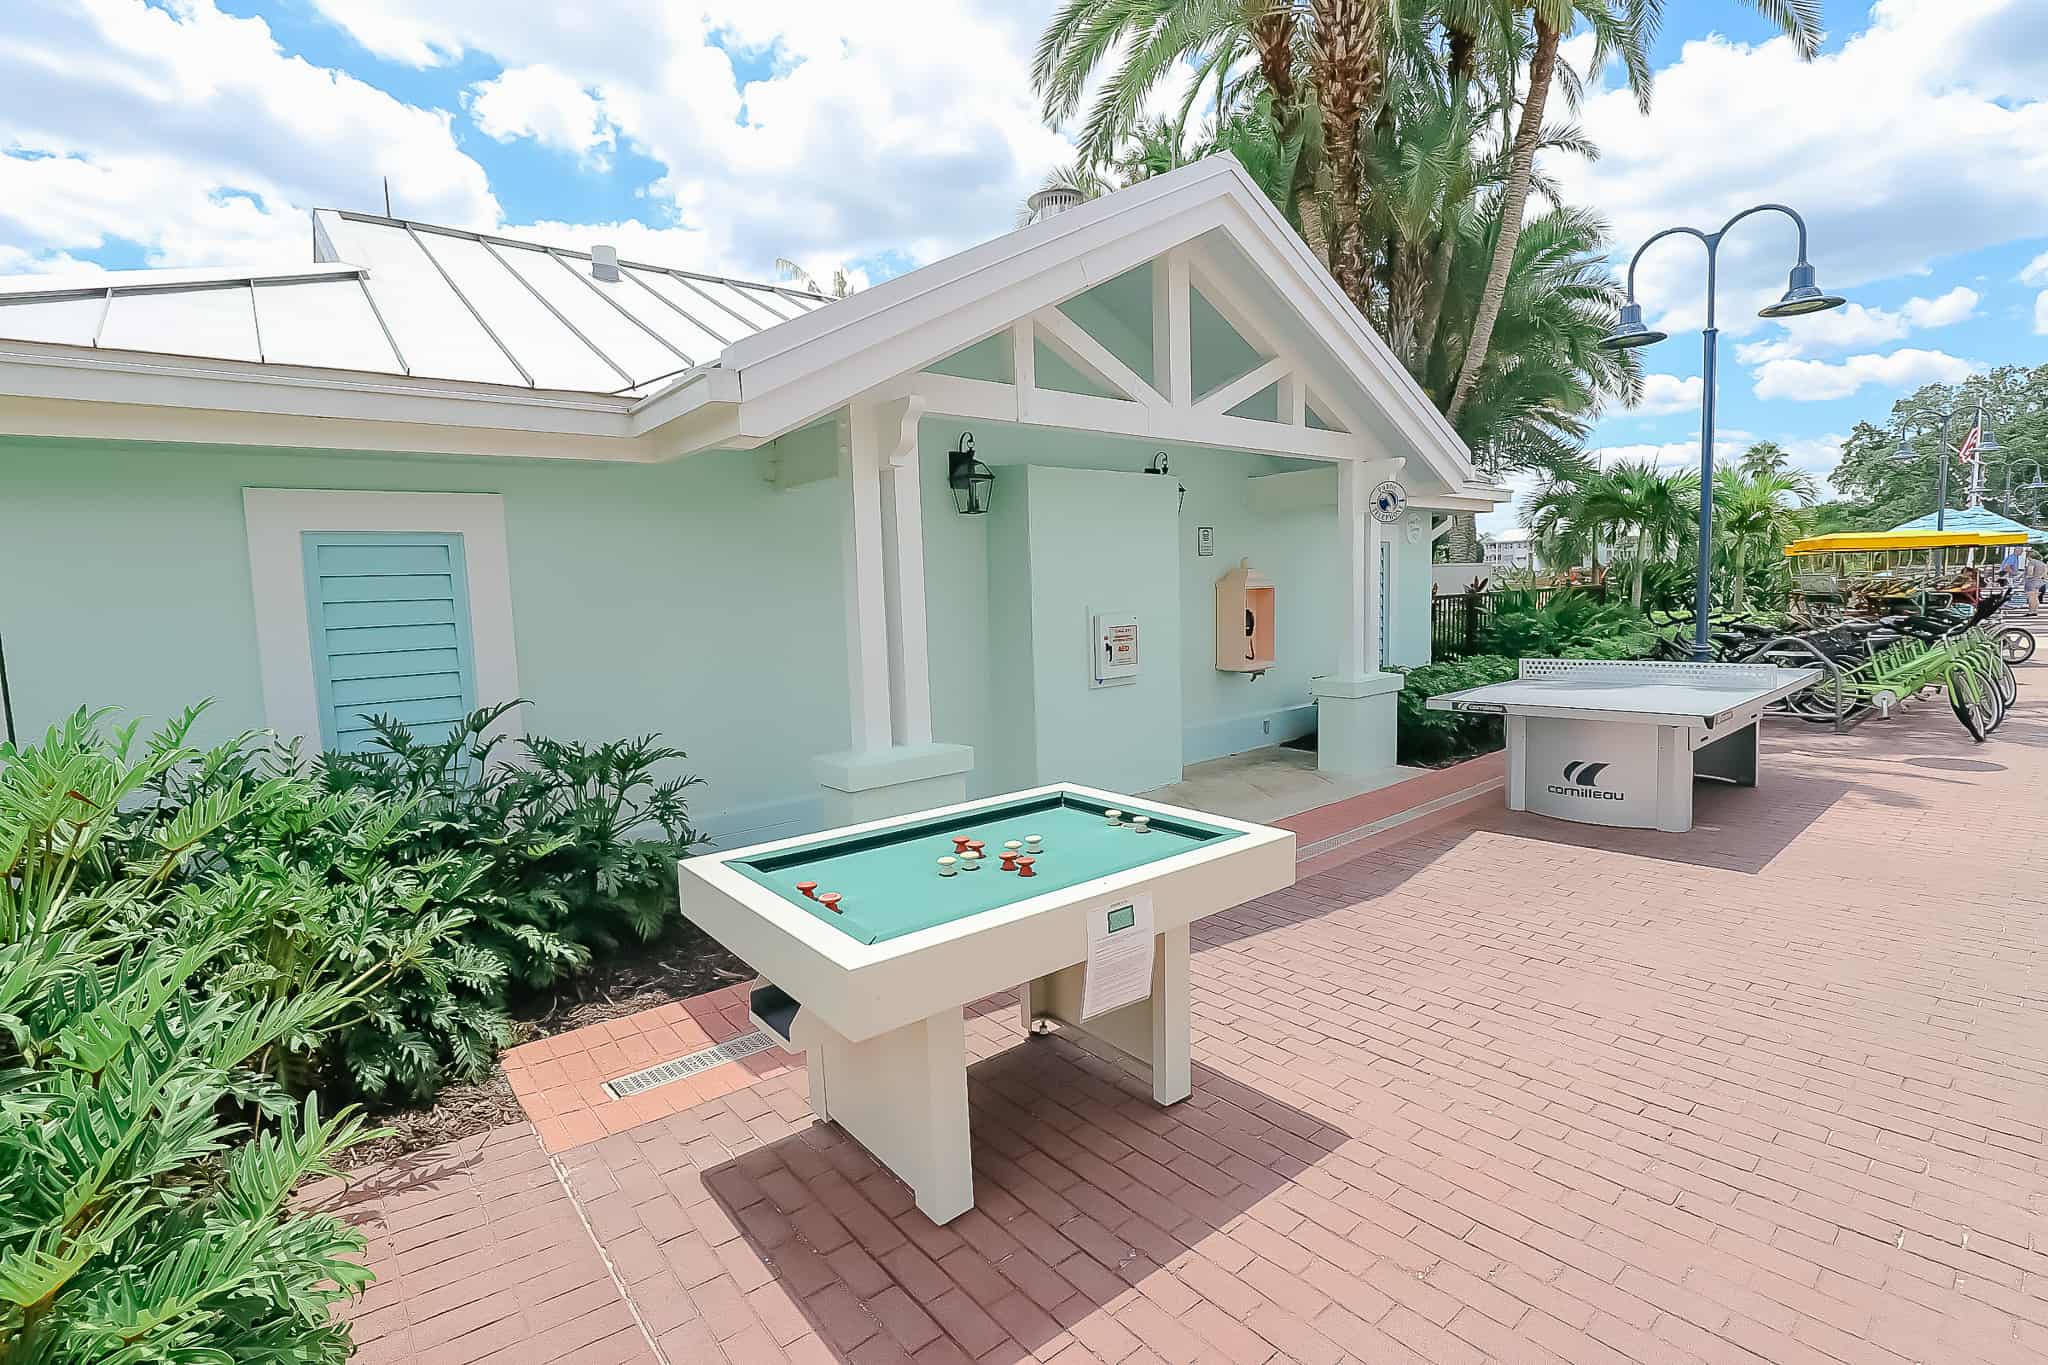 game tables near the pools at Old Key West 